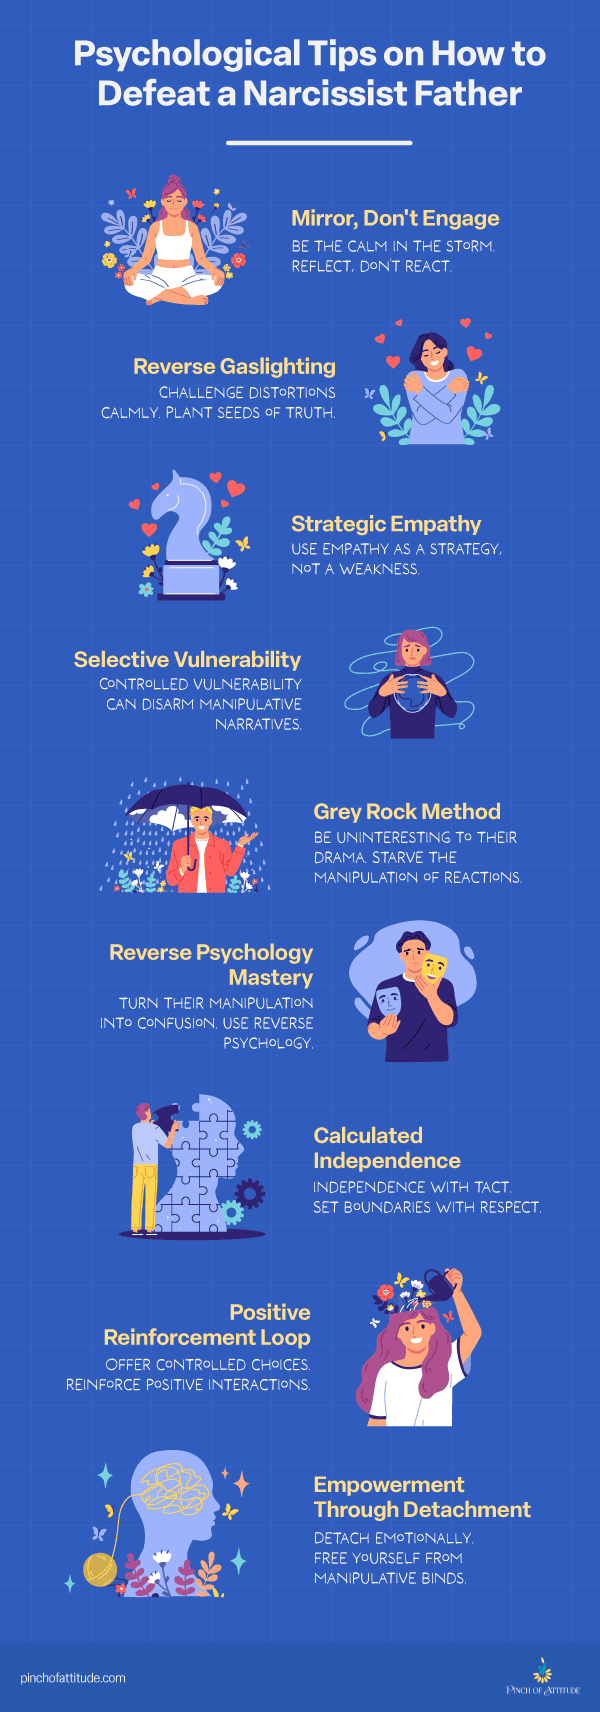 Infographic on 9 tips psychological tips on how to defeat a narcissist father.